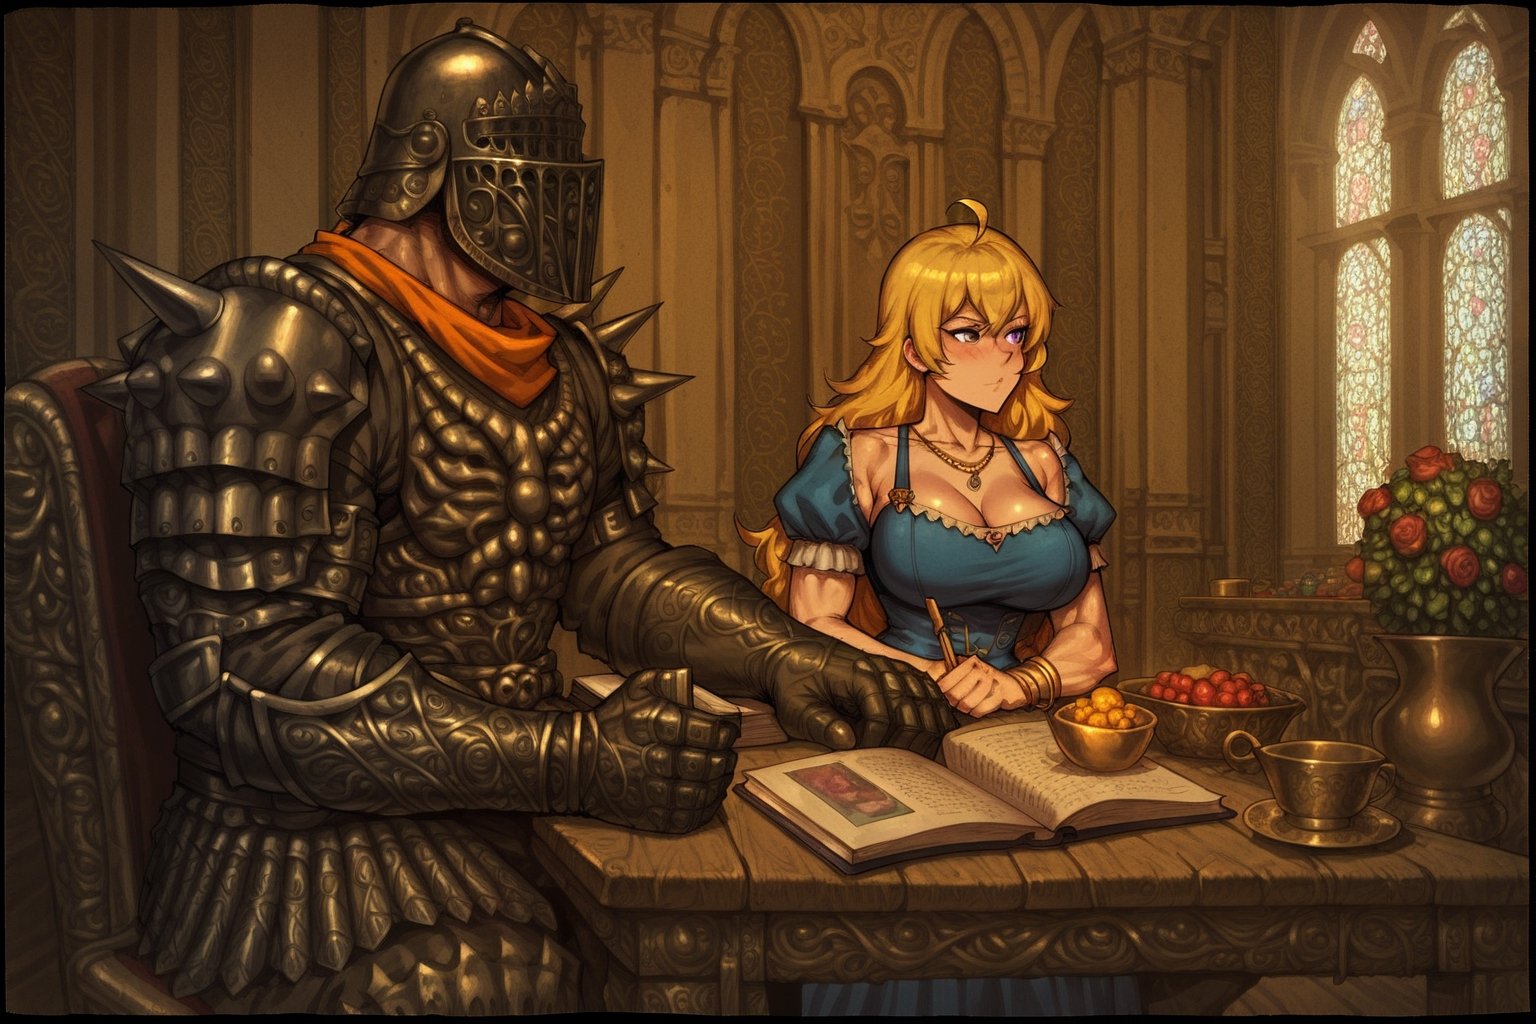 score_9, score_8, score_7, score_8_up, 1boy\(human, dark skin, muscles, giant, tall, wearing full madness Armor and helmet\) with 1girl\(big breasts, Yang Xiao Long wearing blue dress, blushing pouty lips, seductive\), both sitting on chairs, both staring at each other, reading book, (garden exterior, lakeside),  score_7_up, side view